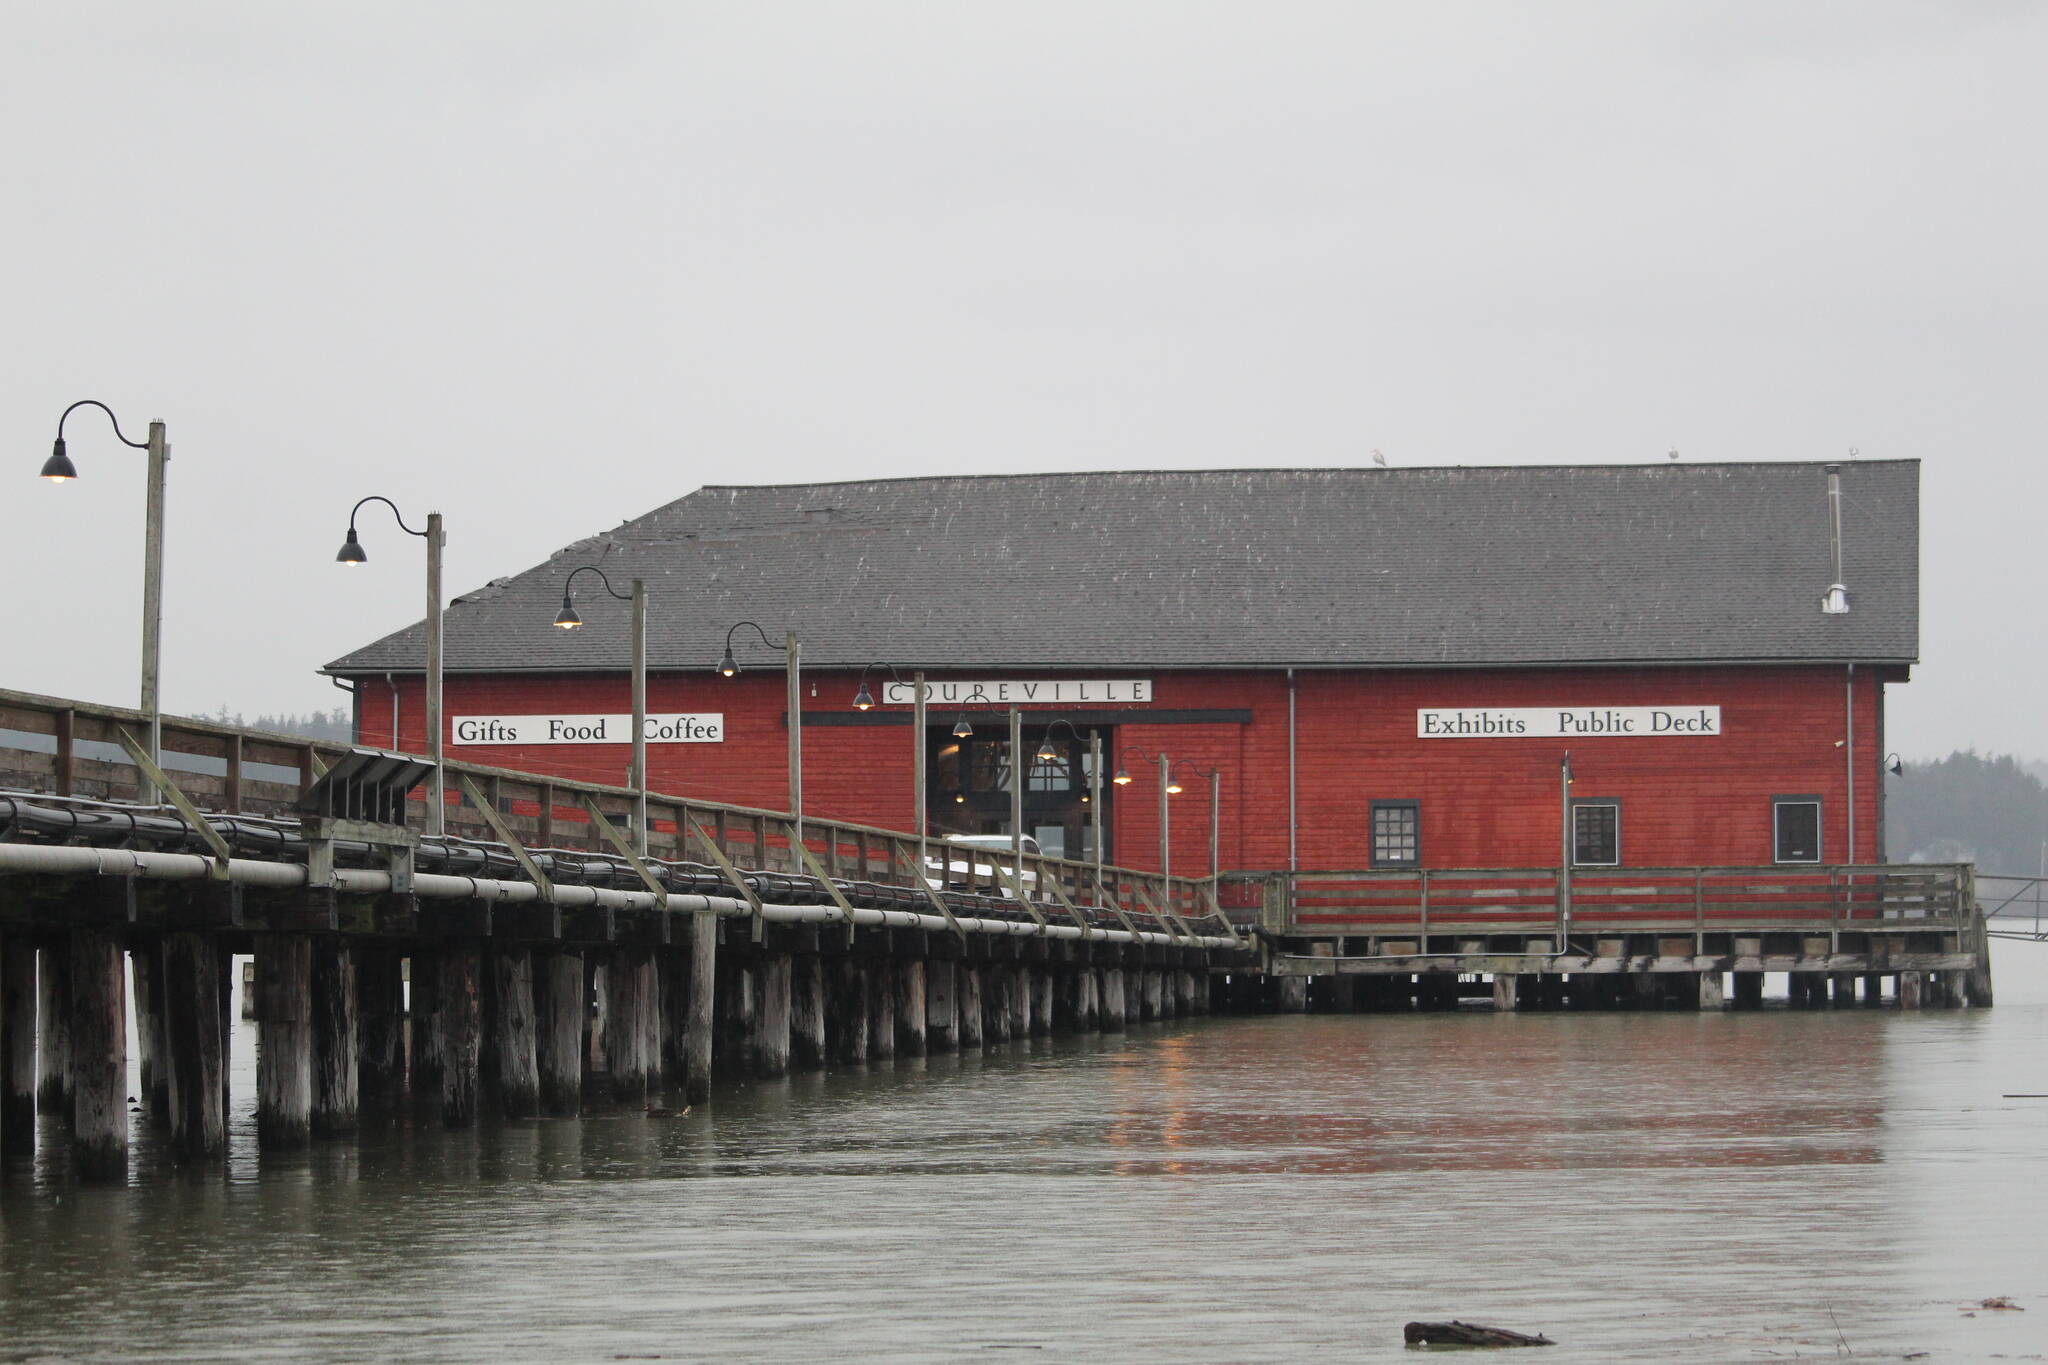 The Coupeville Wharf will soon have a new roof. (File photo by Karina Andrew/Whidbey News-Times)